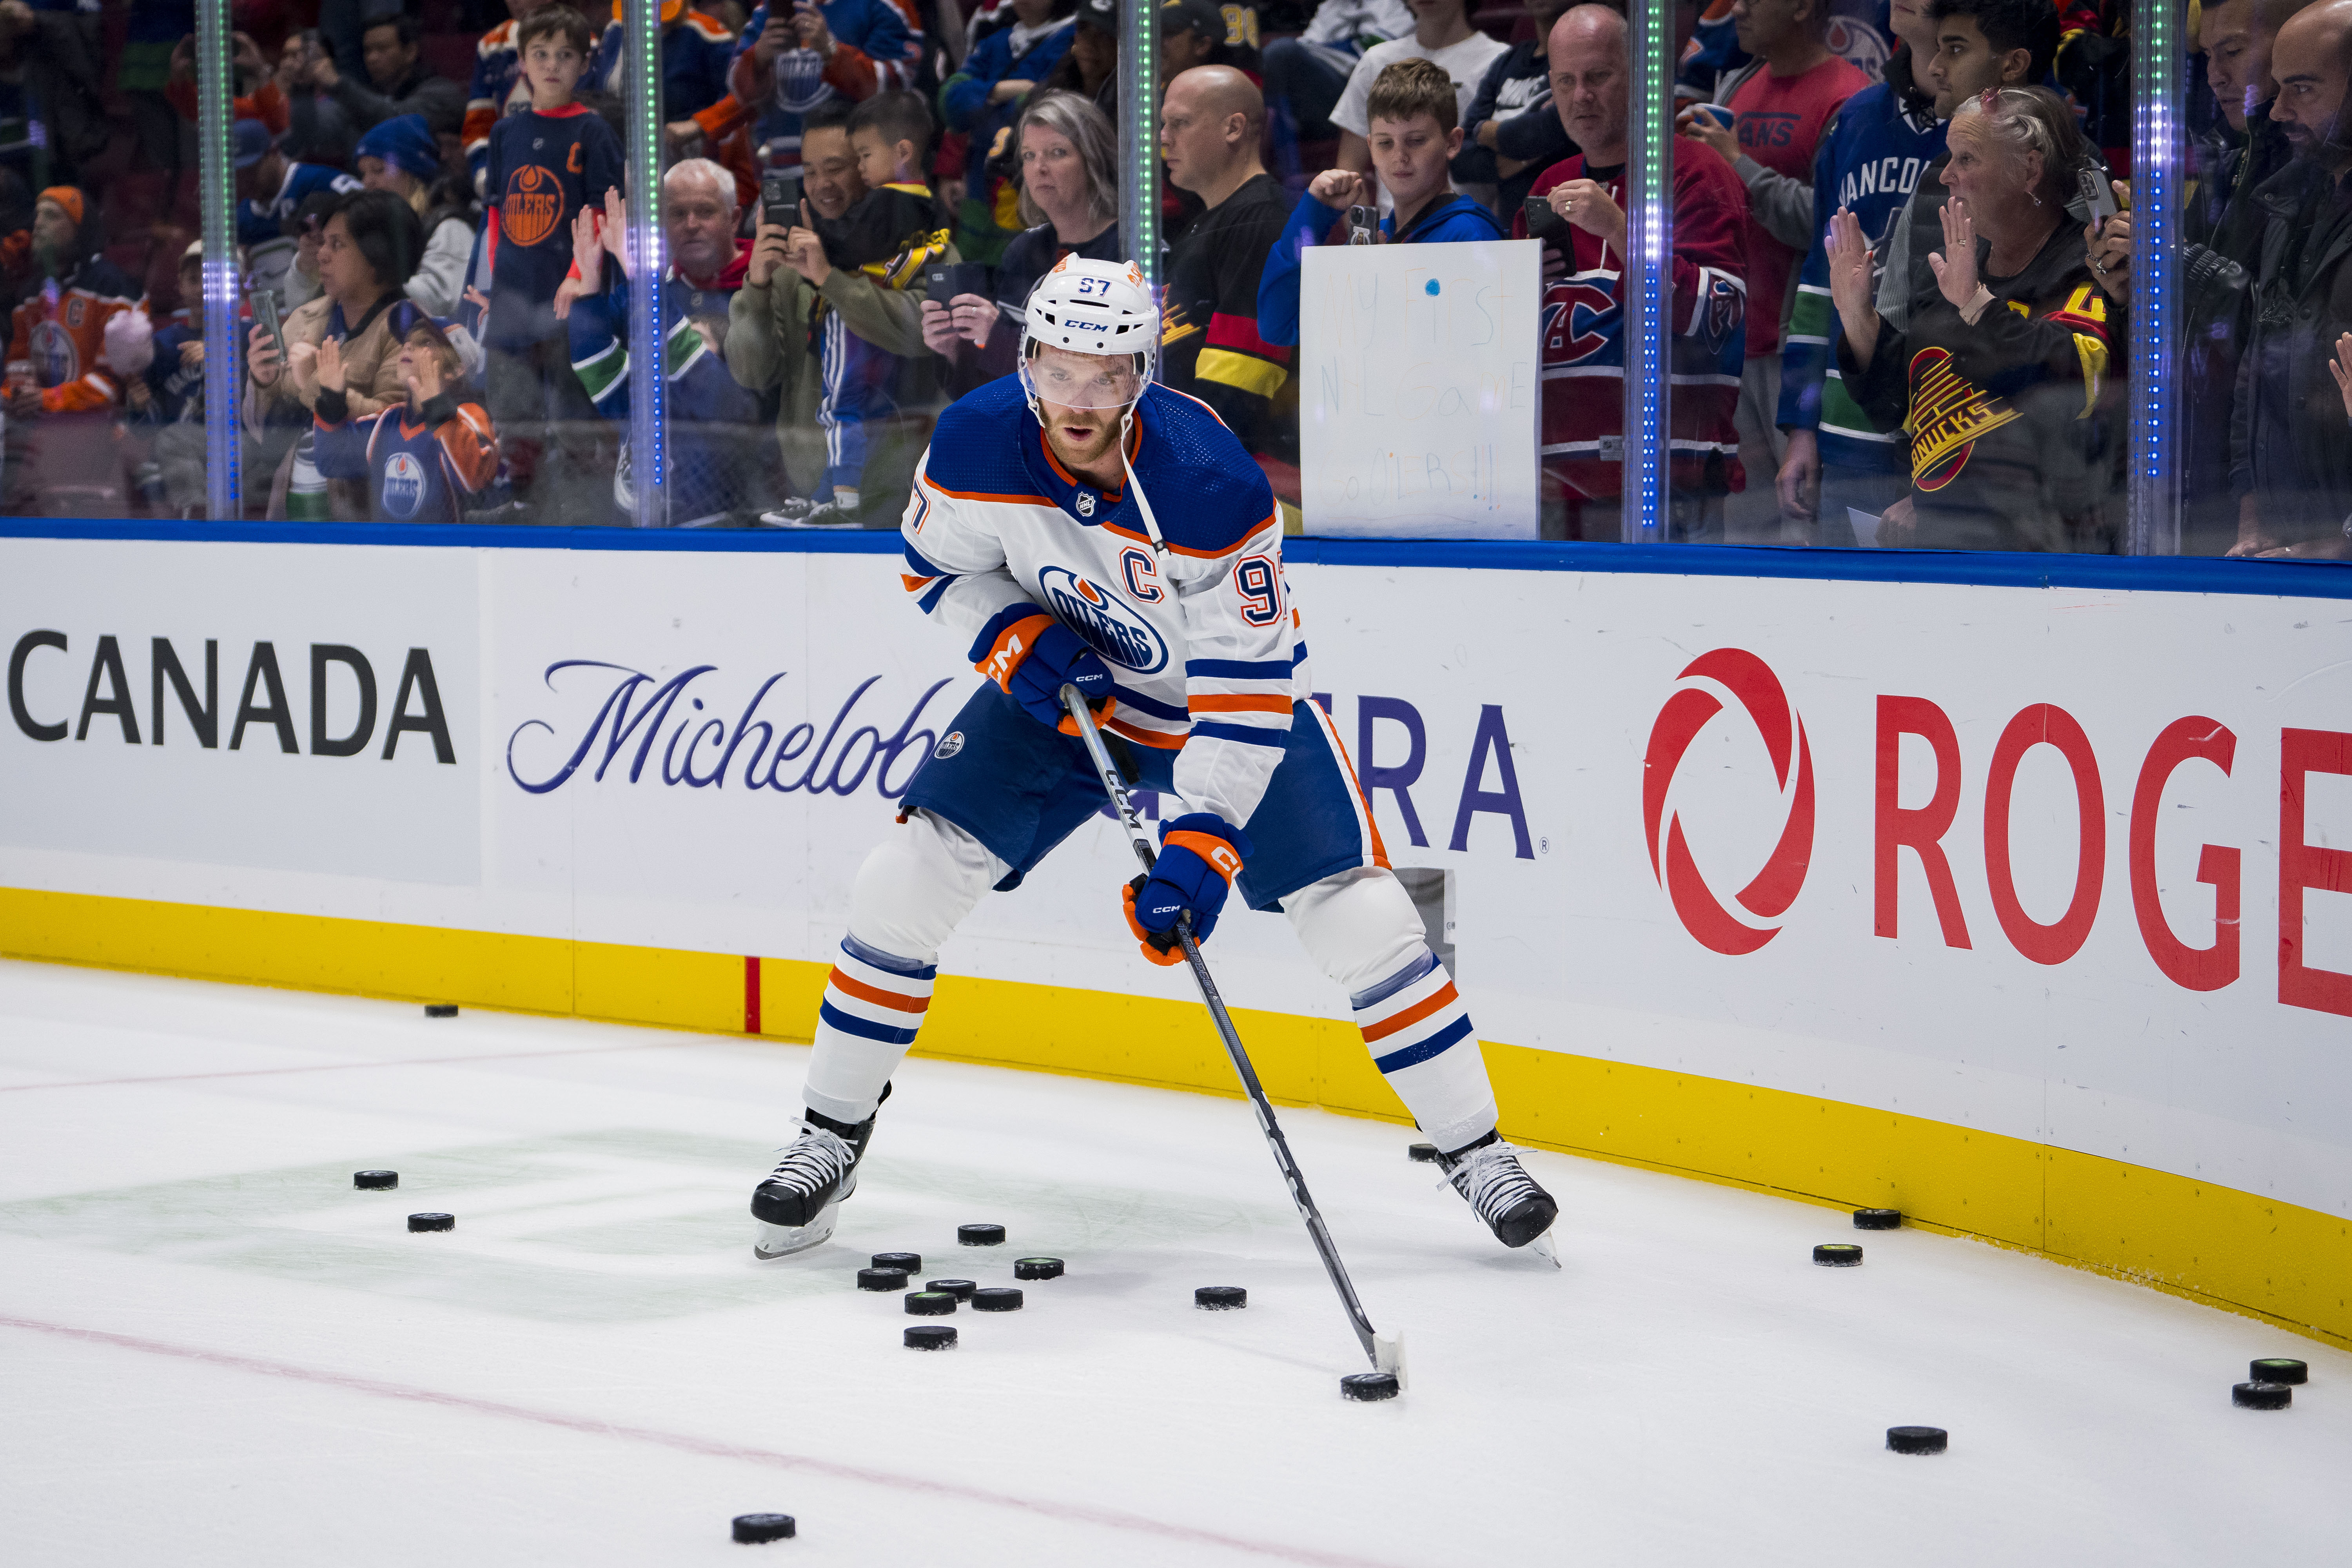 Edmonton Oilers Adding Fourth Jersey? - The Sports Daily